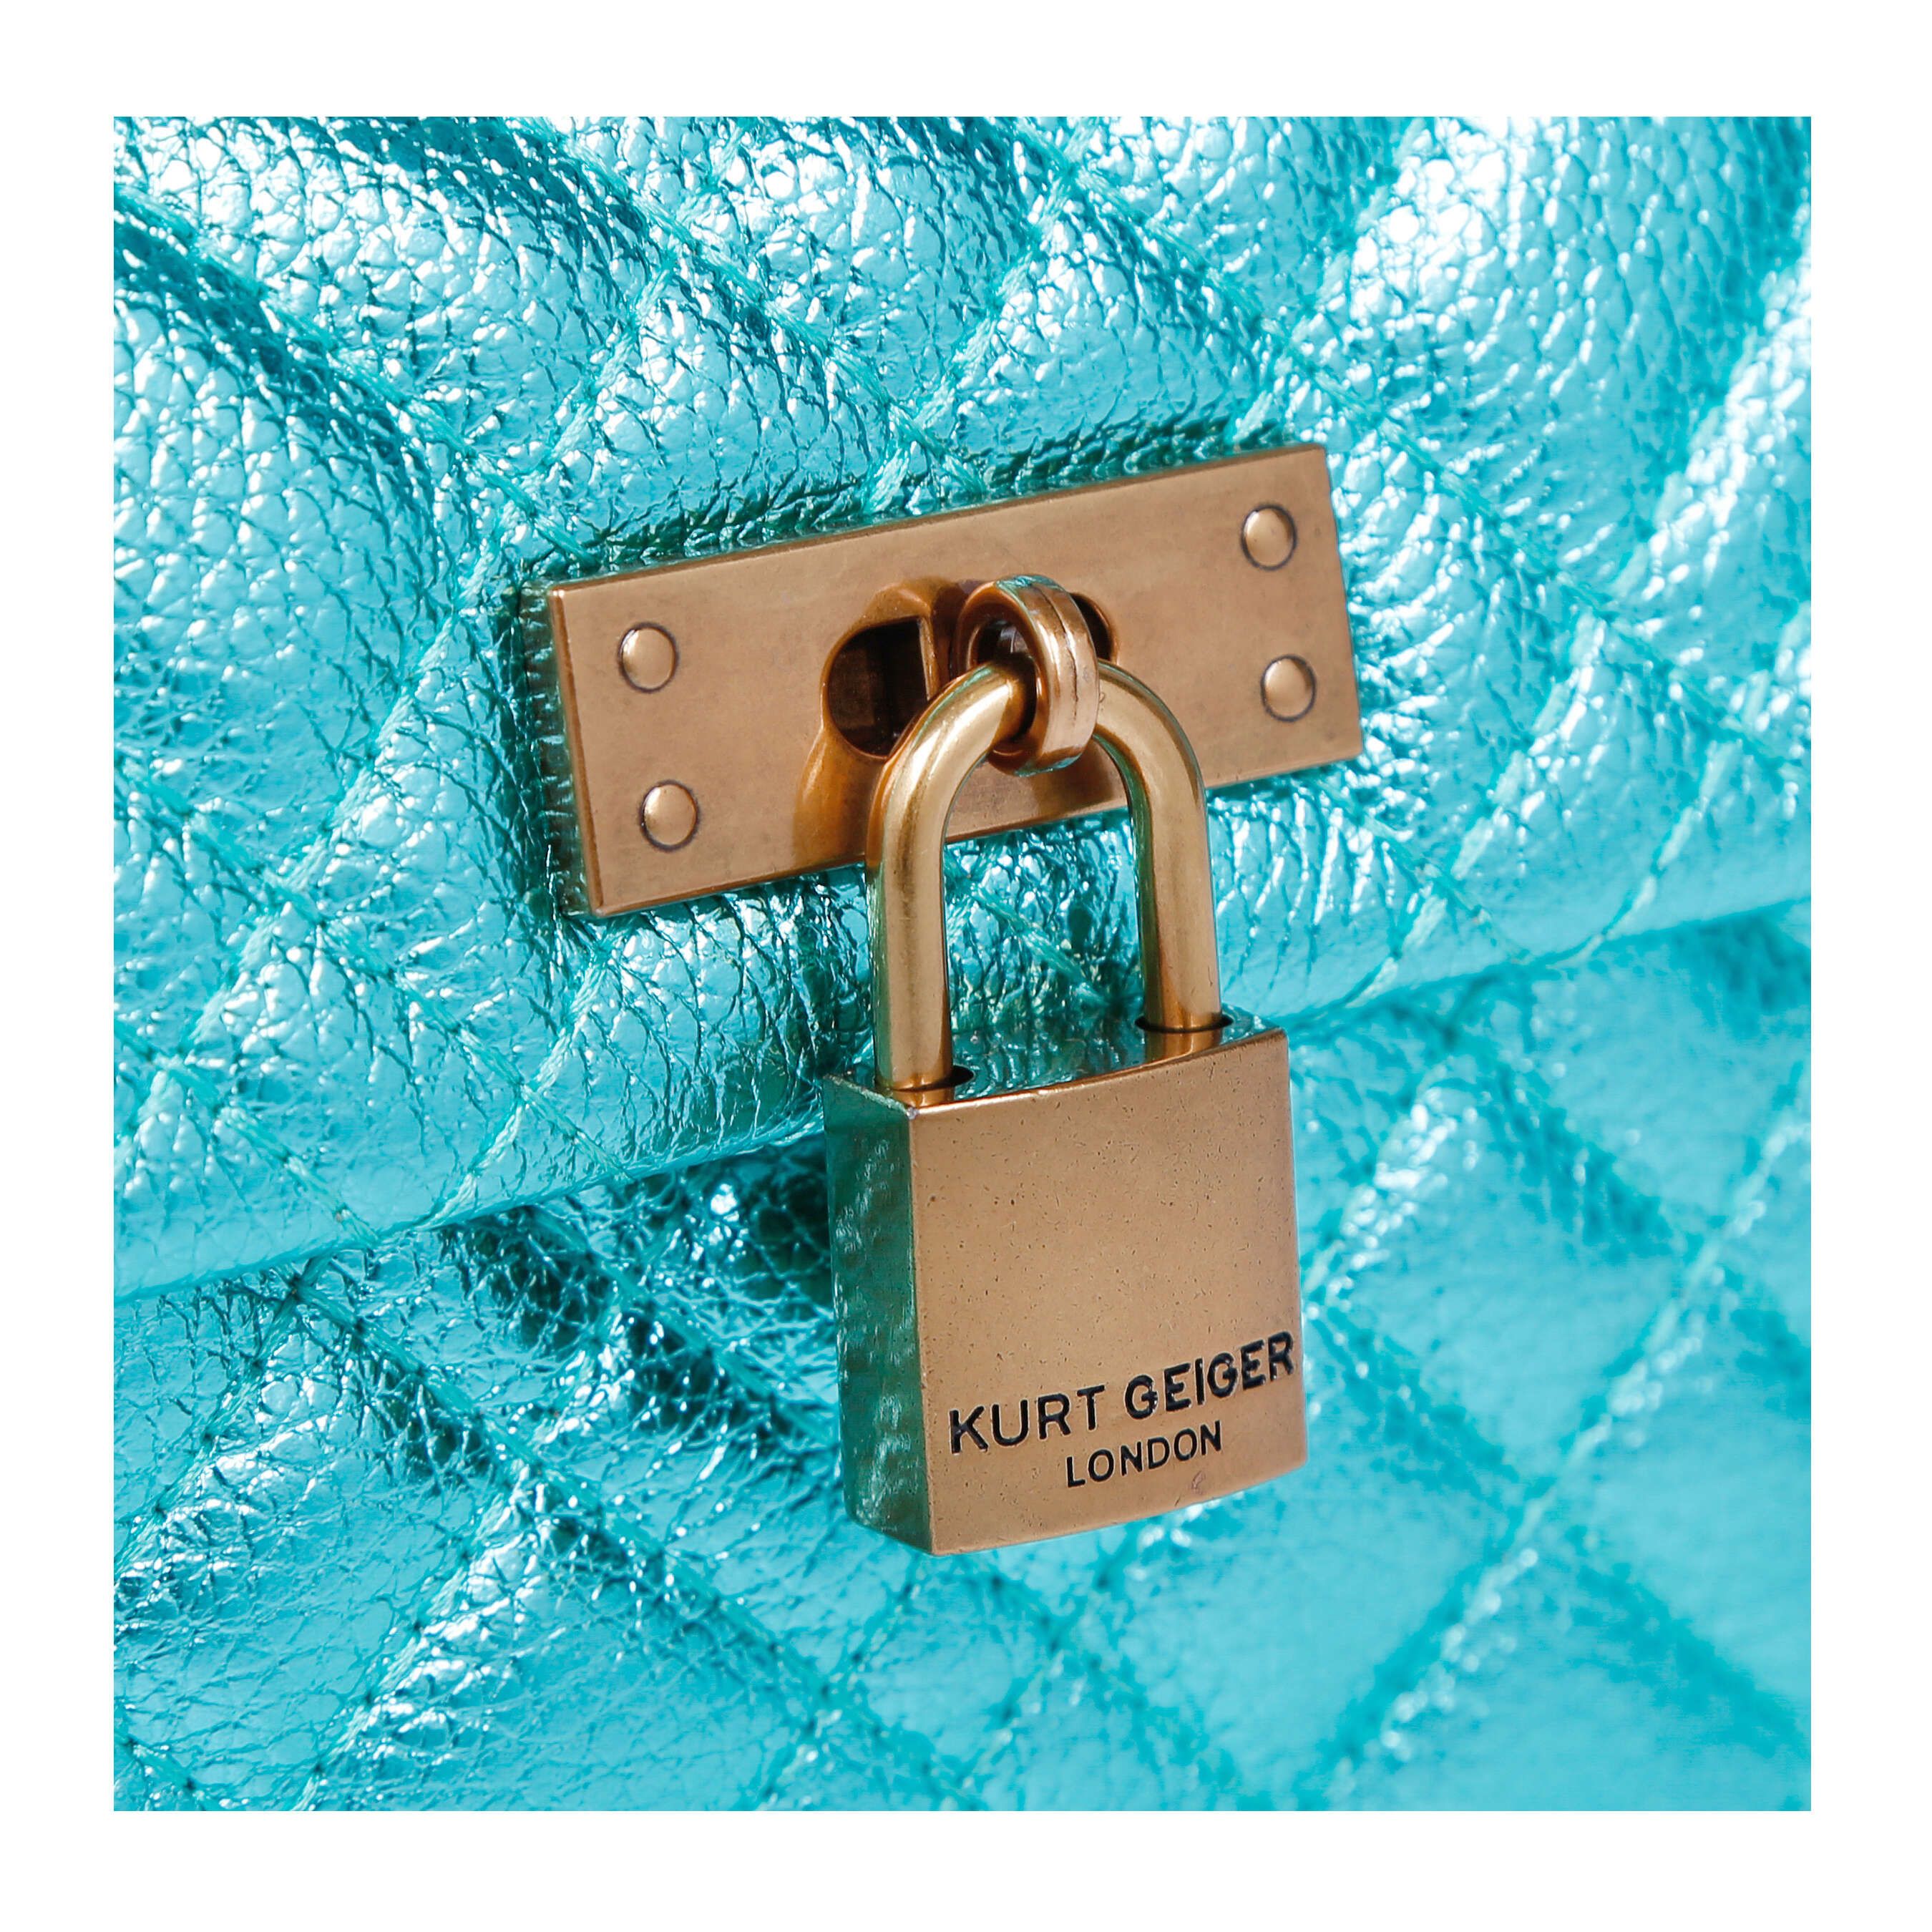 The mini metallic blue KGL Brixton Lock Bag is crafted from fabric with overstitch quilting design. There is an antiqued brass branded padlock on the front flap.